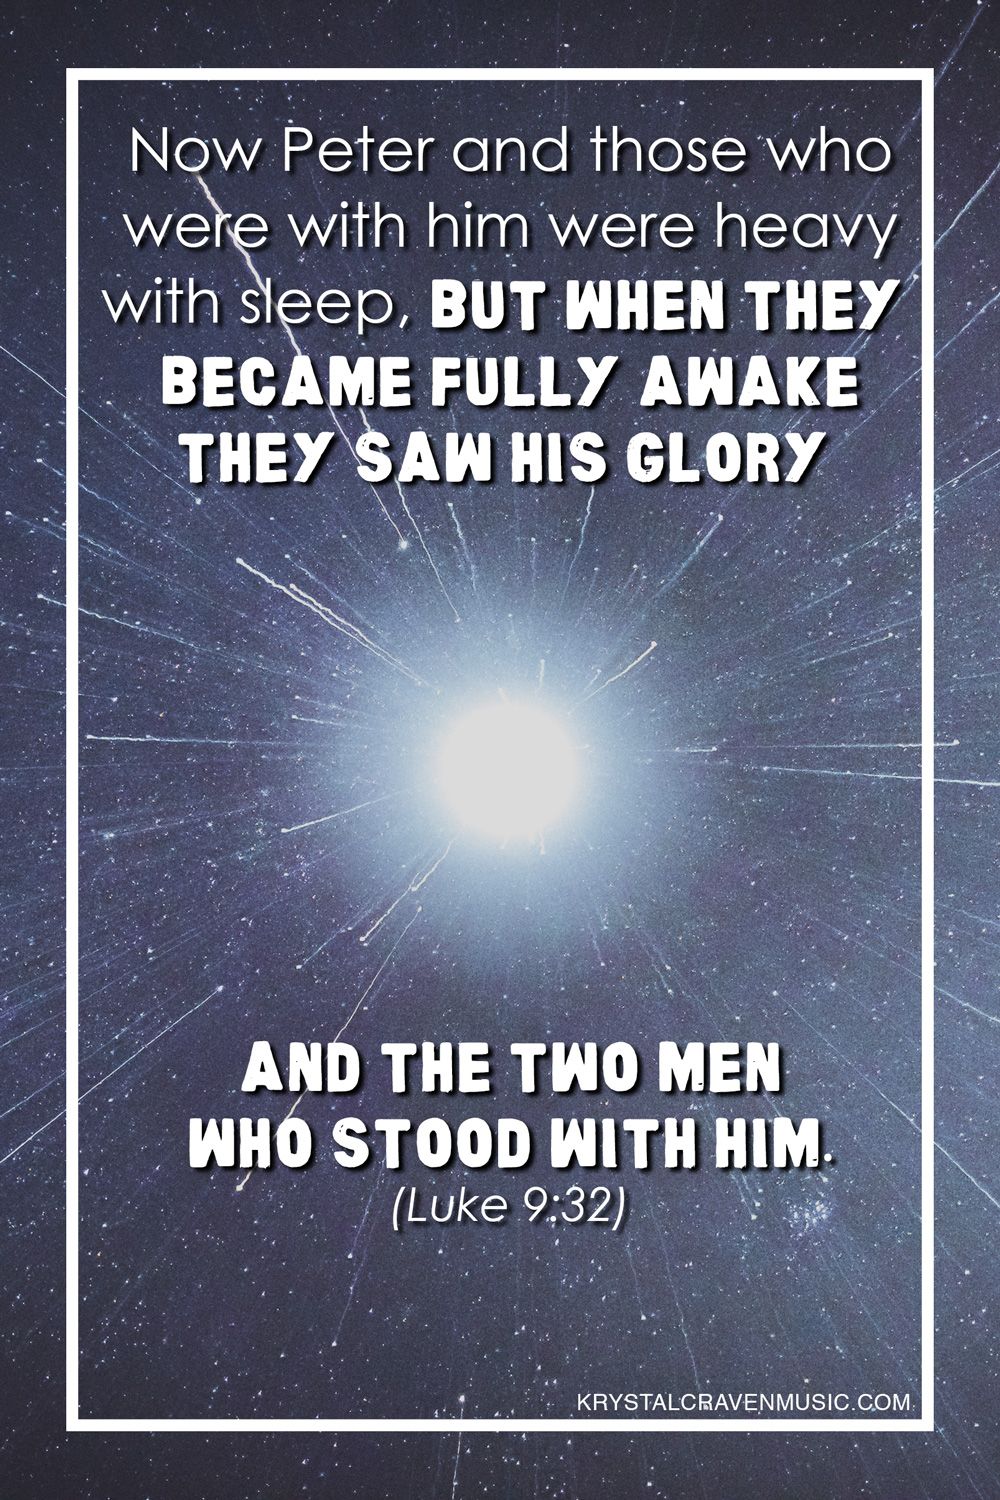 The Bible verse text from Luke 9:32, "Now Peter and those who were with him were heavy with sleep, but when they became fully awake they saw his glory and the two men who stood with him." The text overlays a bright light in the center of a dark sky with motion blurred stars around the light.